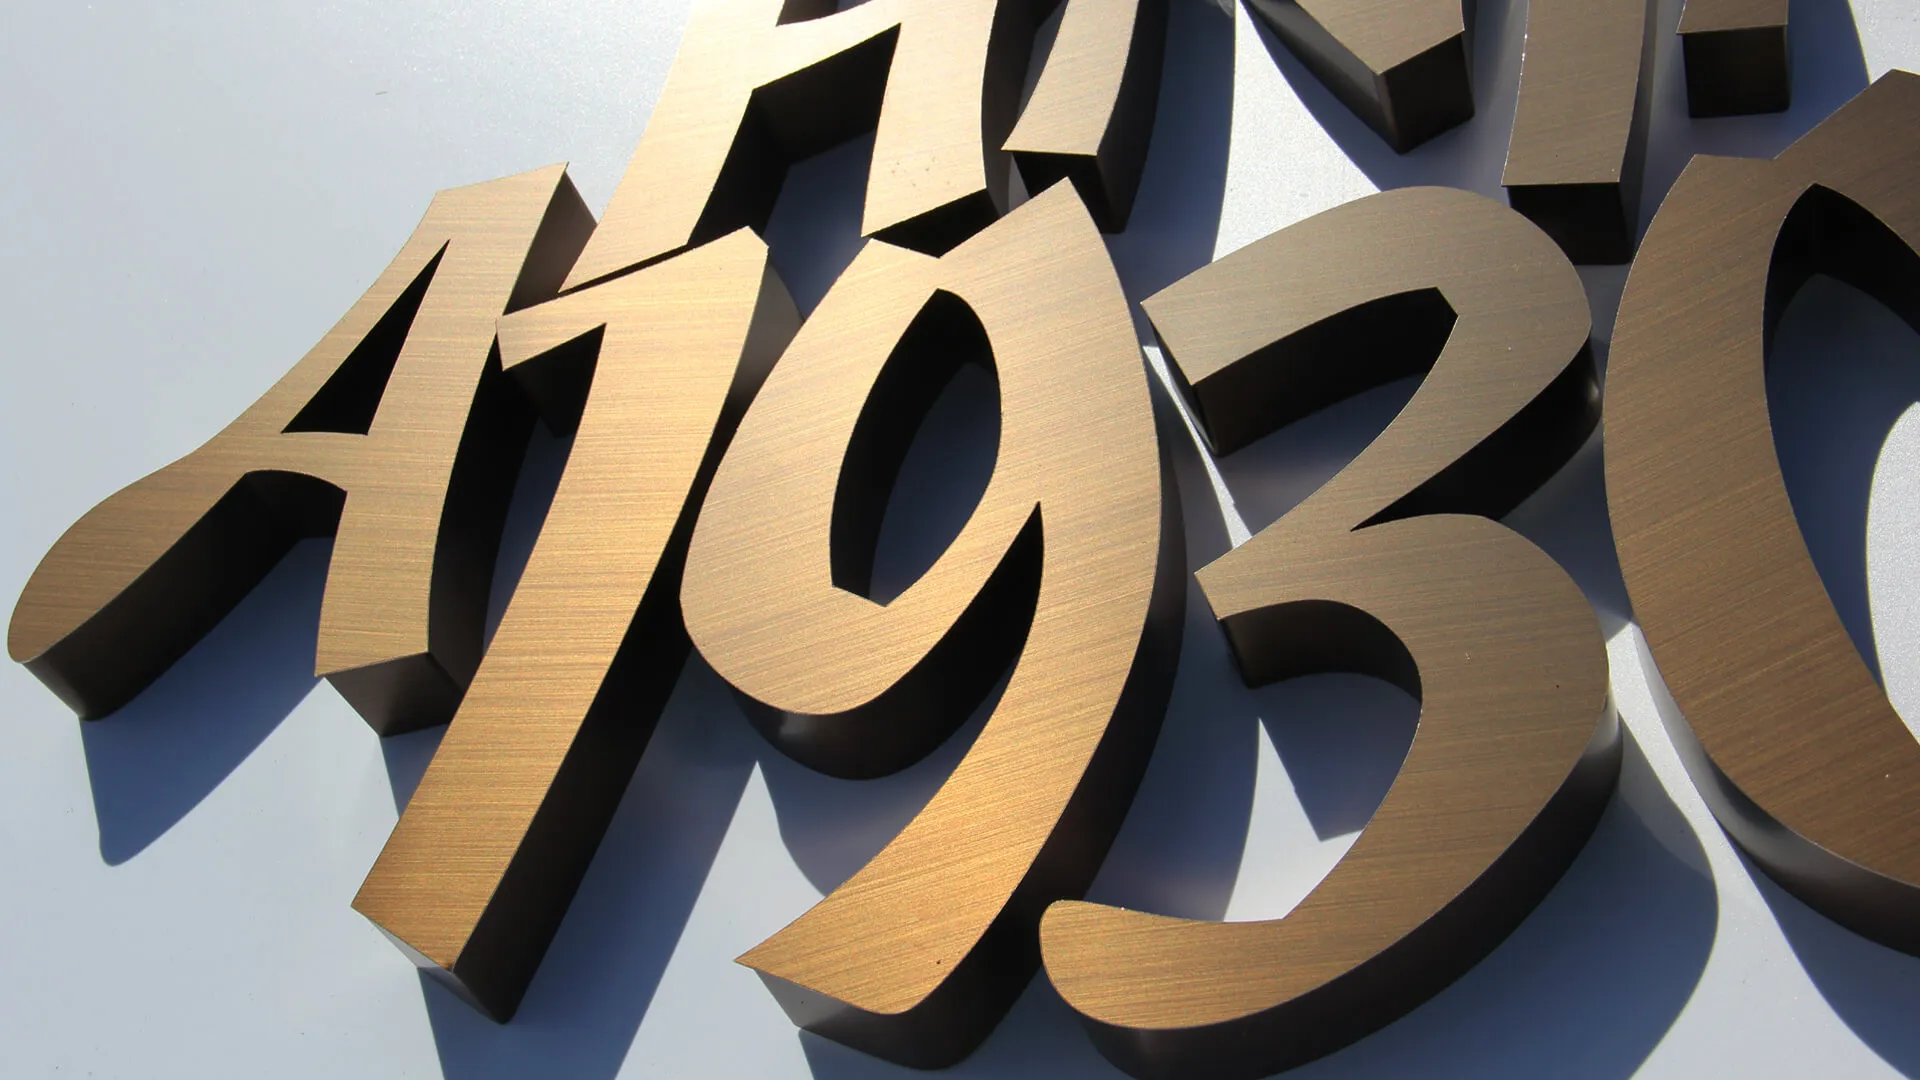 Numbers and letters made of stainless steel in brushed bronze.